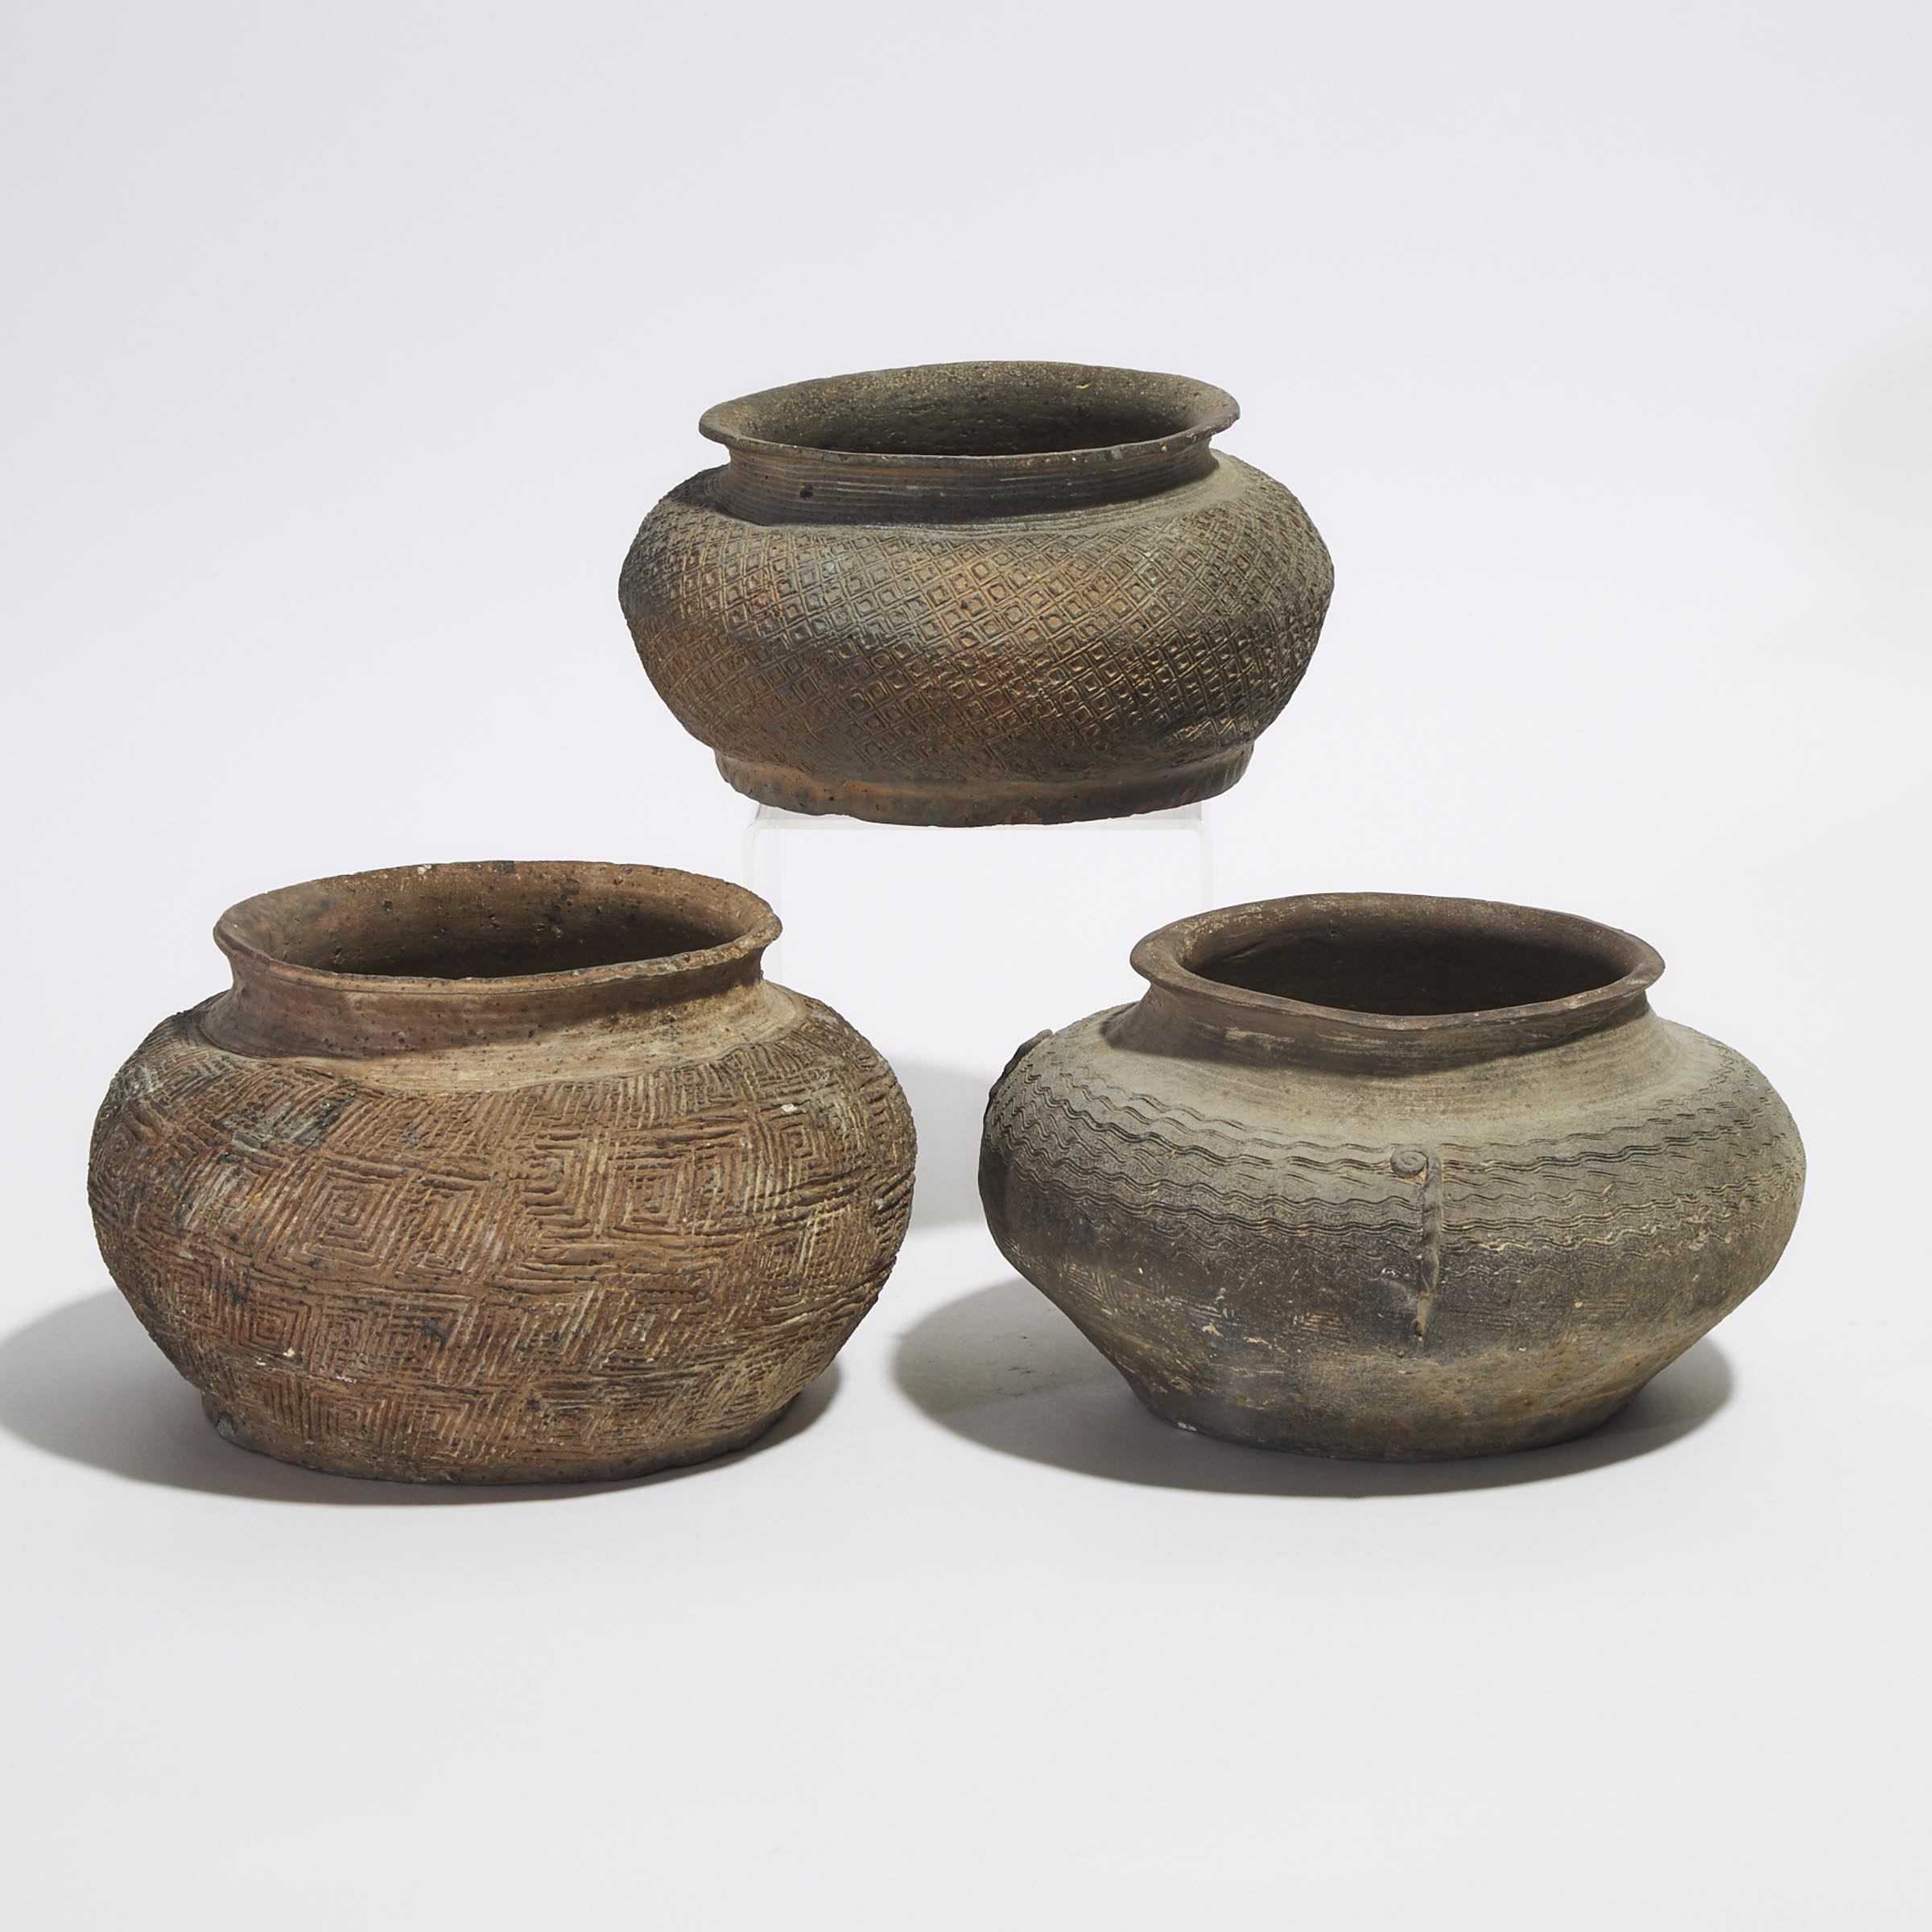 A Group of Three Pottery Jars, Warring States Period (475-221 BC)